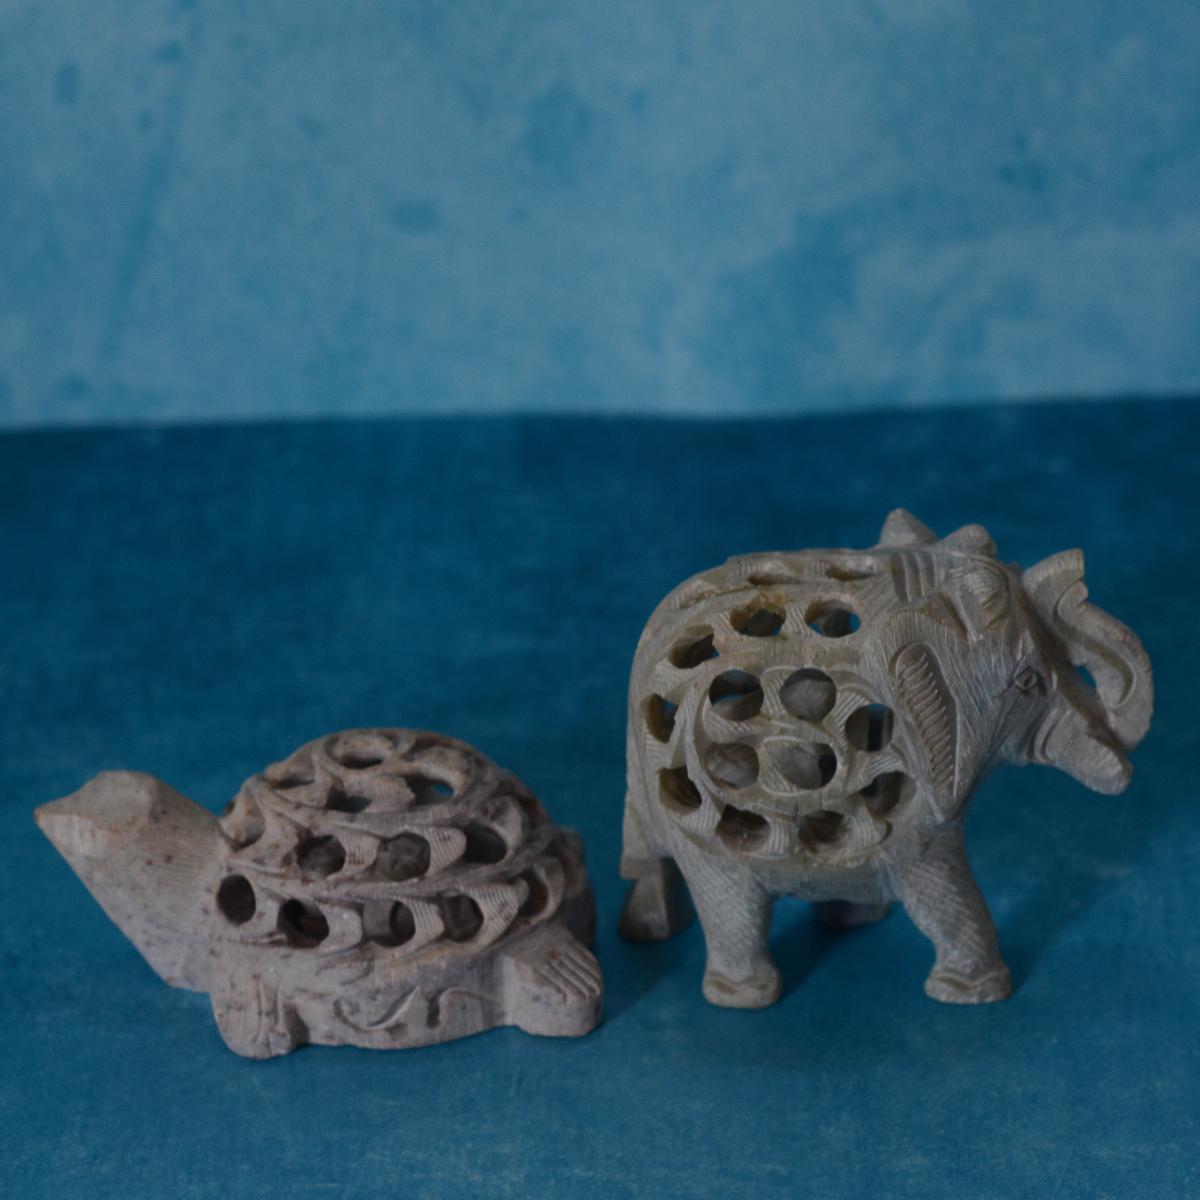 Agra Marble Carved Tortoise - Small